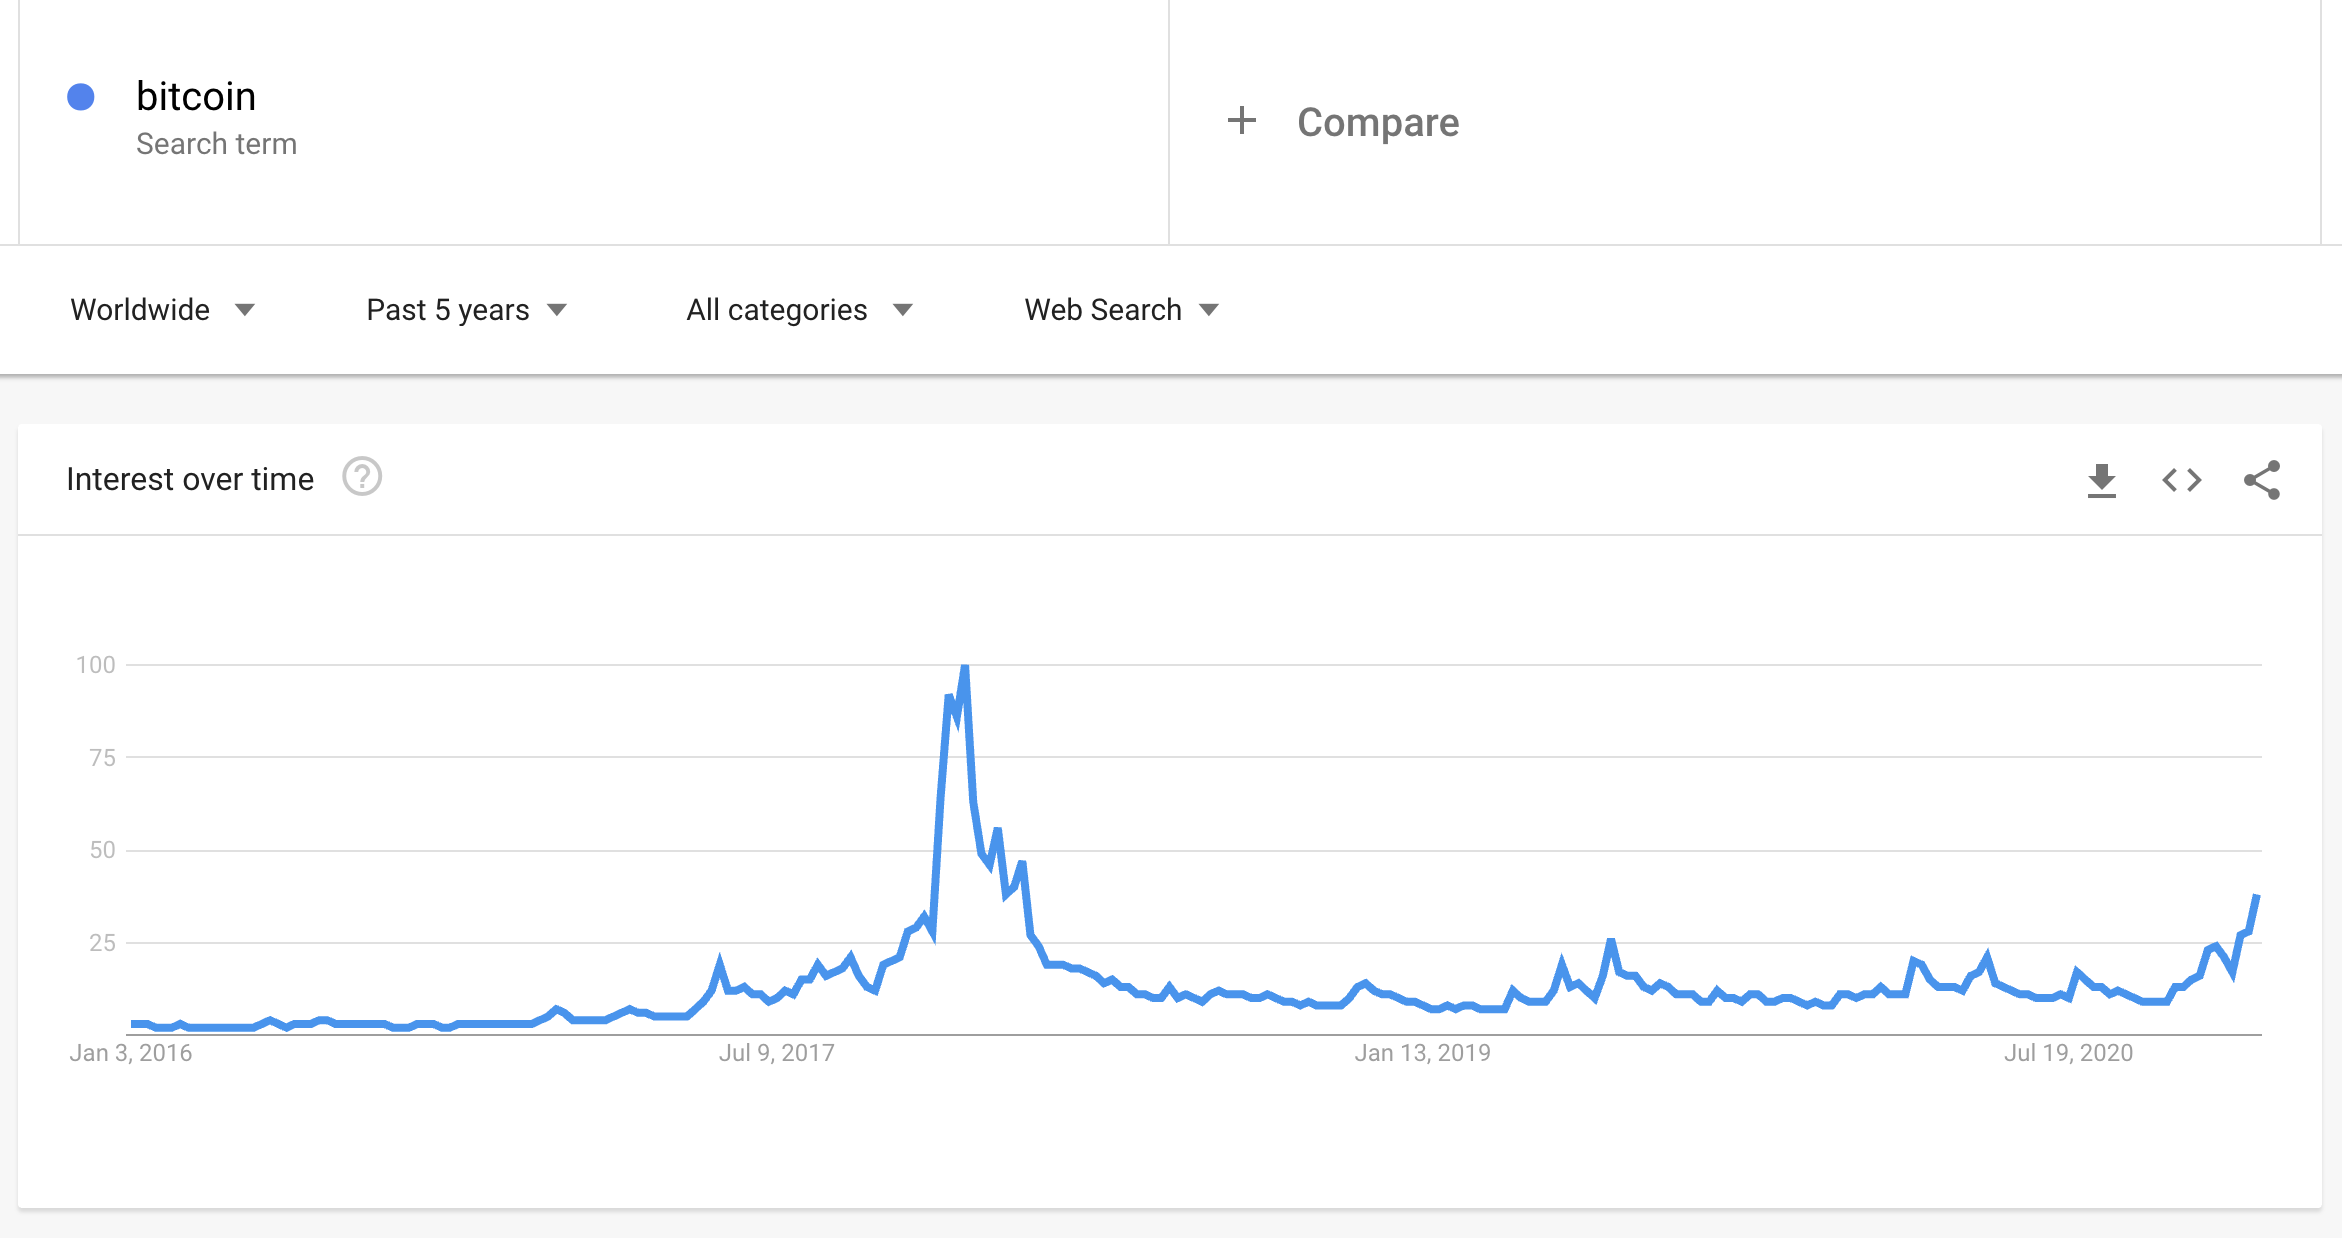 bitcoin search trend on Google